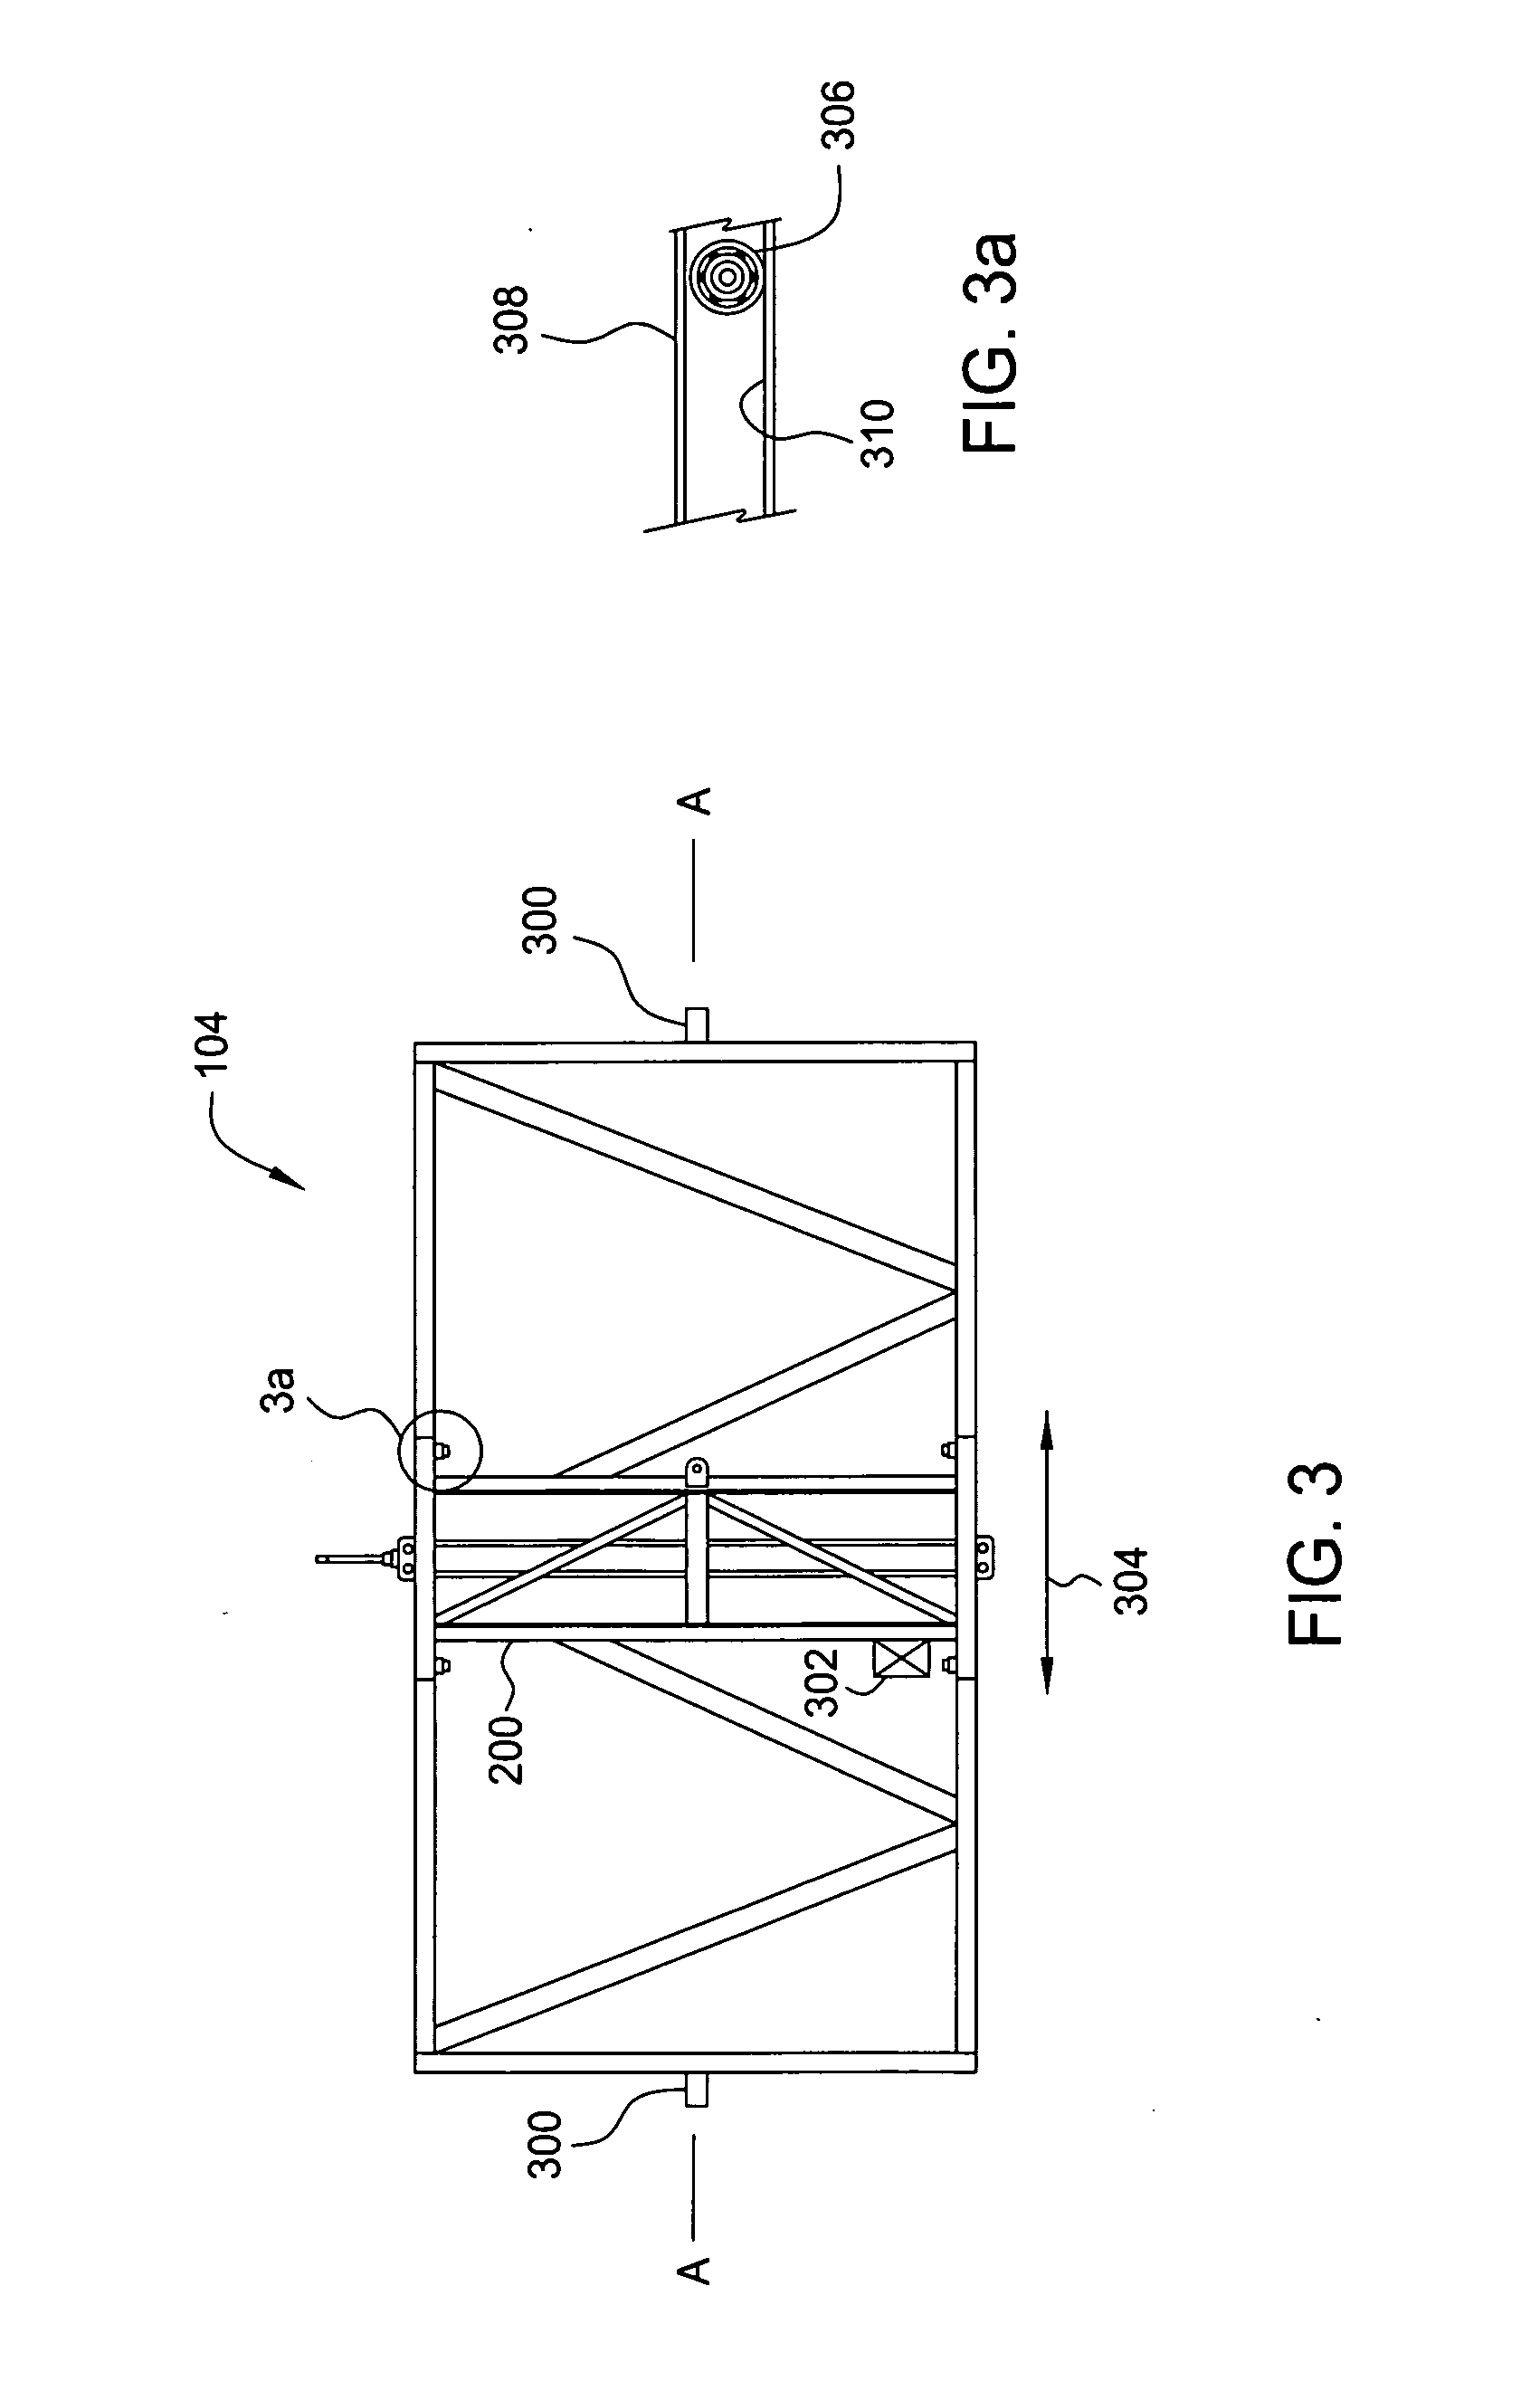 Concrete cooling injection unit and method of injecting a coolant into a concrete mixture